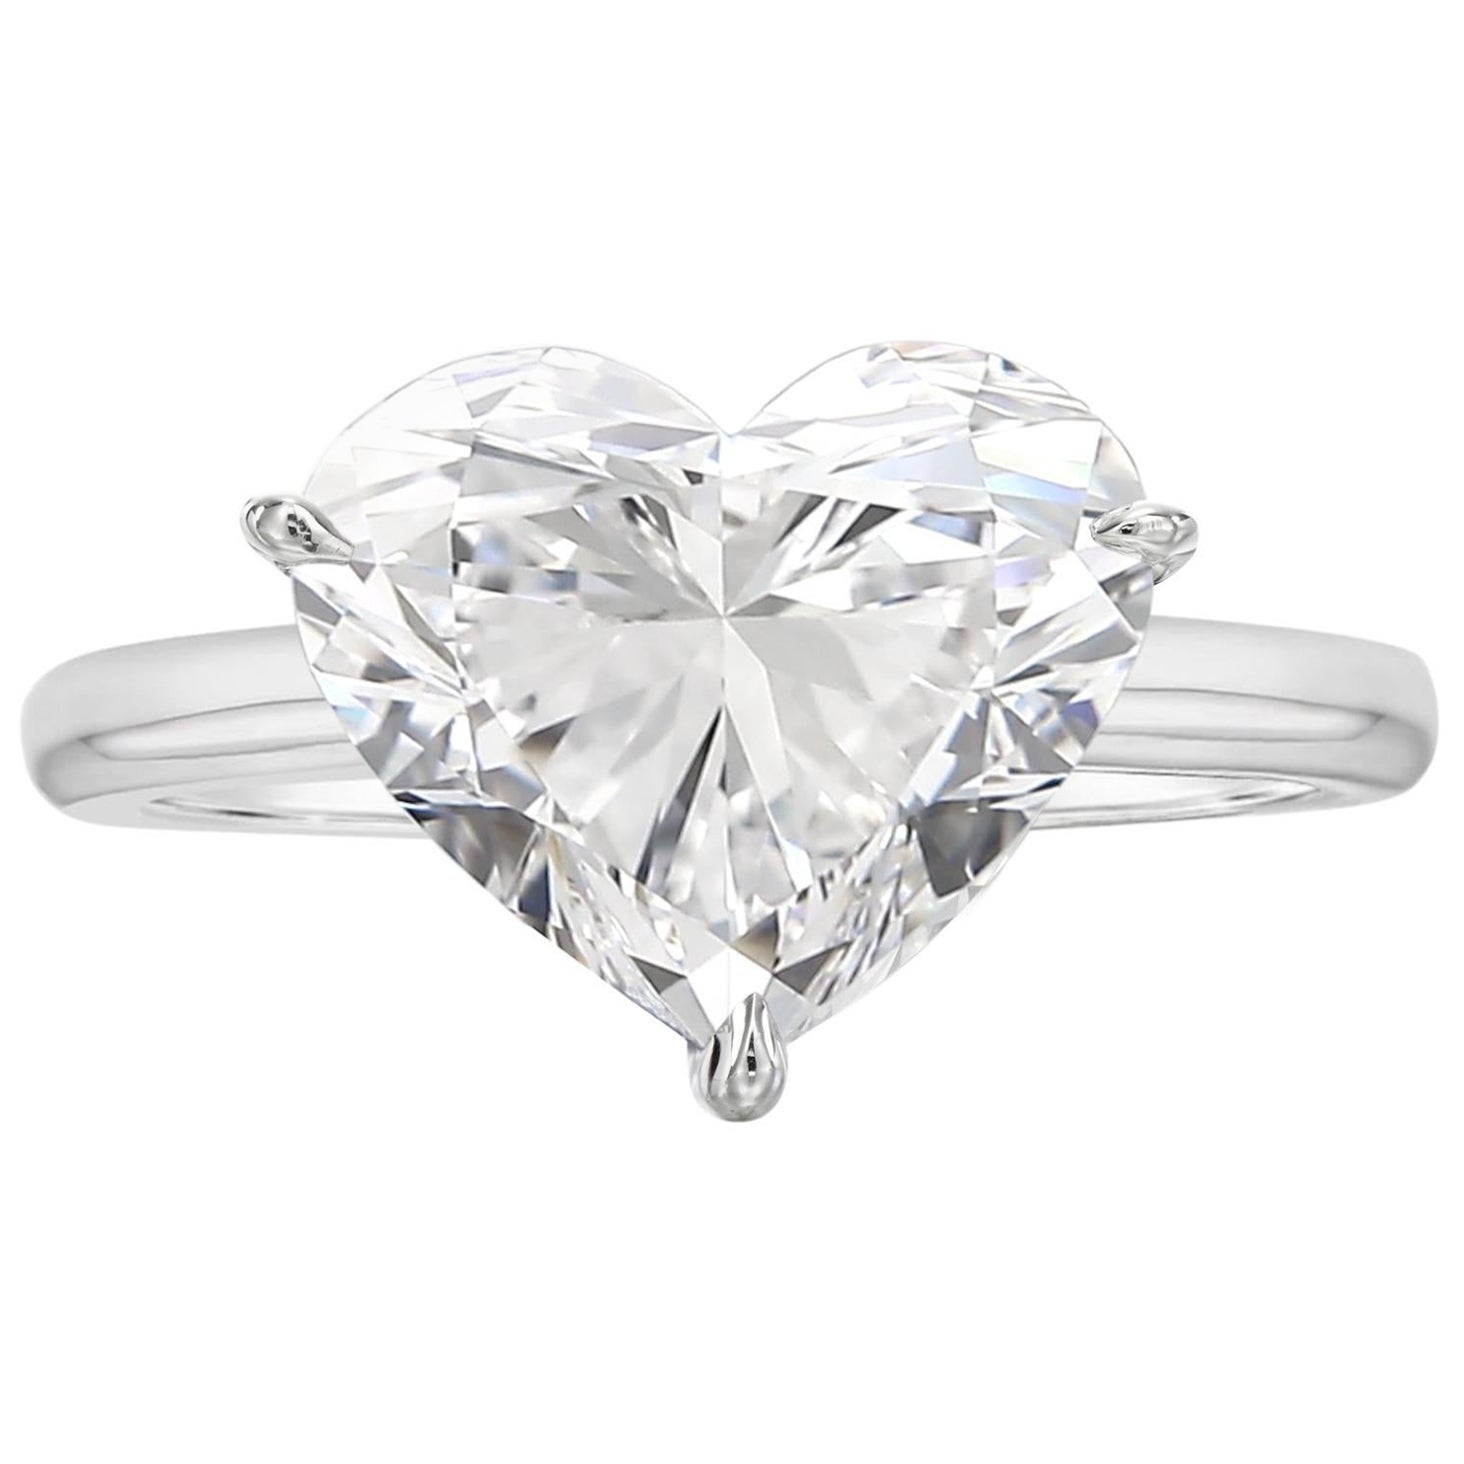 Exceptional GIA Certified 5 Carat Heart Shape Diamond Ring